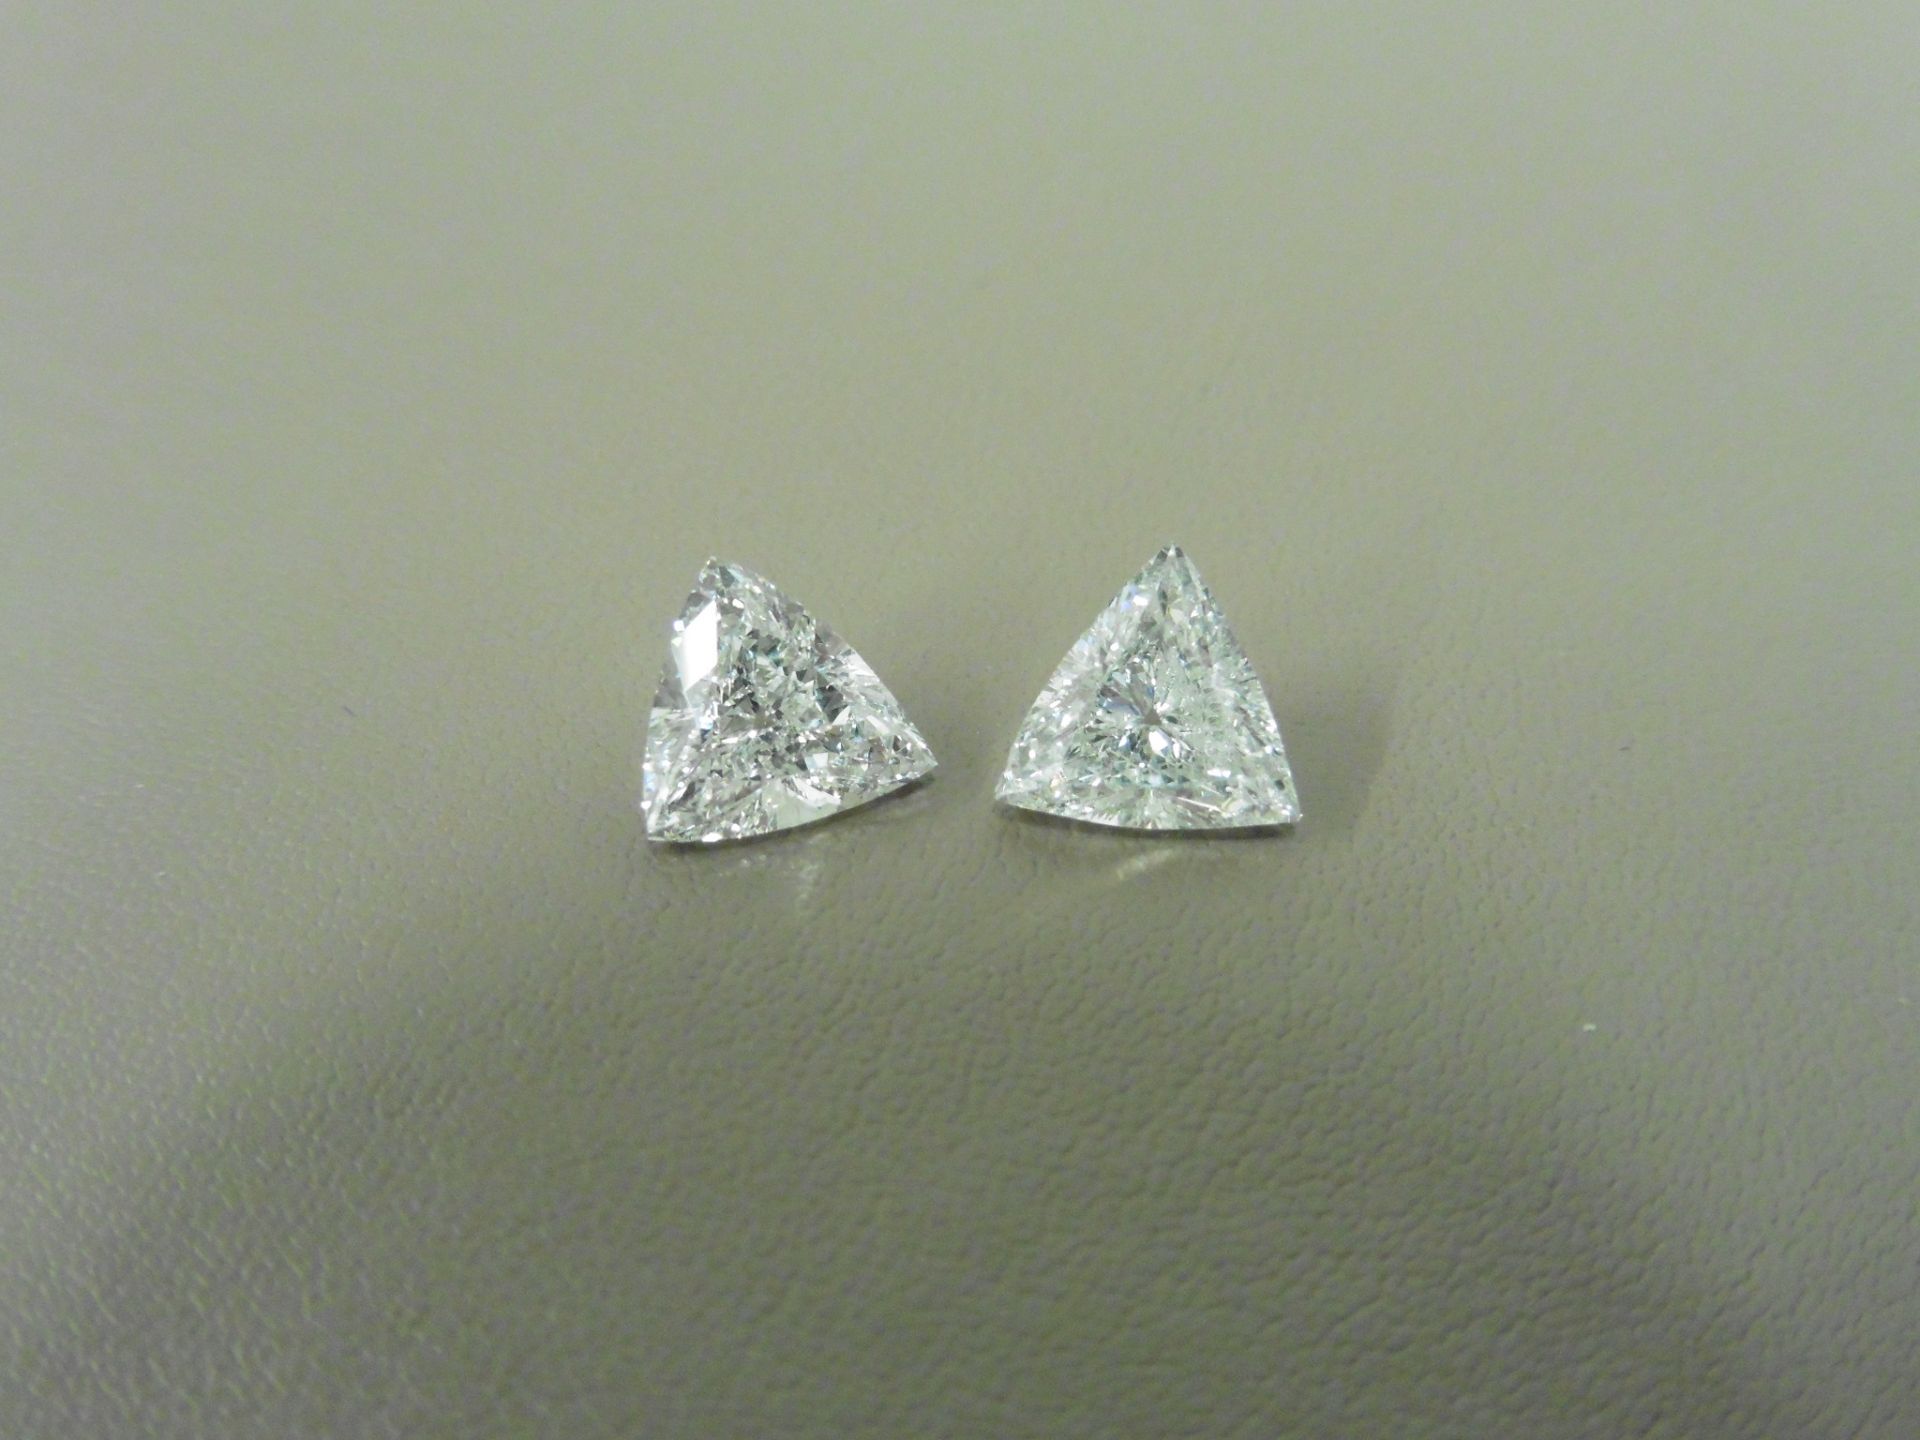 2.21ct natural loose pair of triangular diamonds. F colour and VS-SI clarity. EGL certificaton. - Image 2 of 4